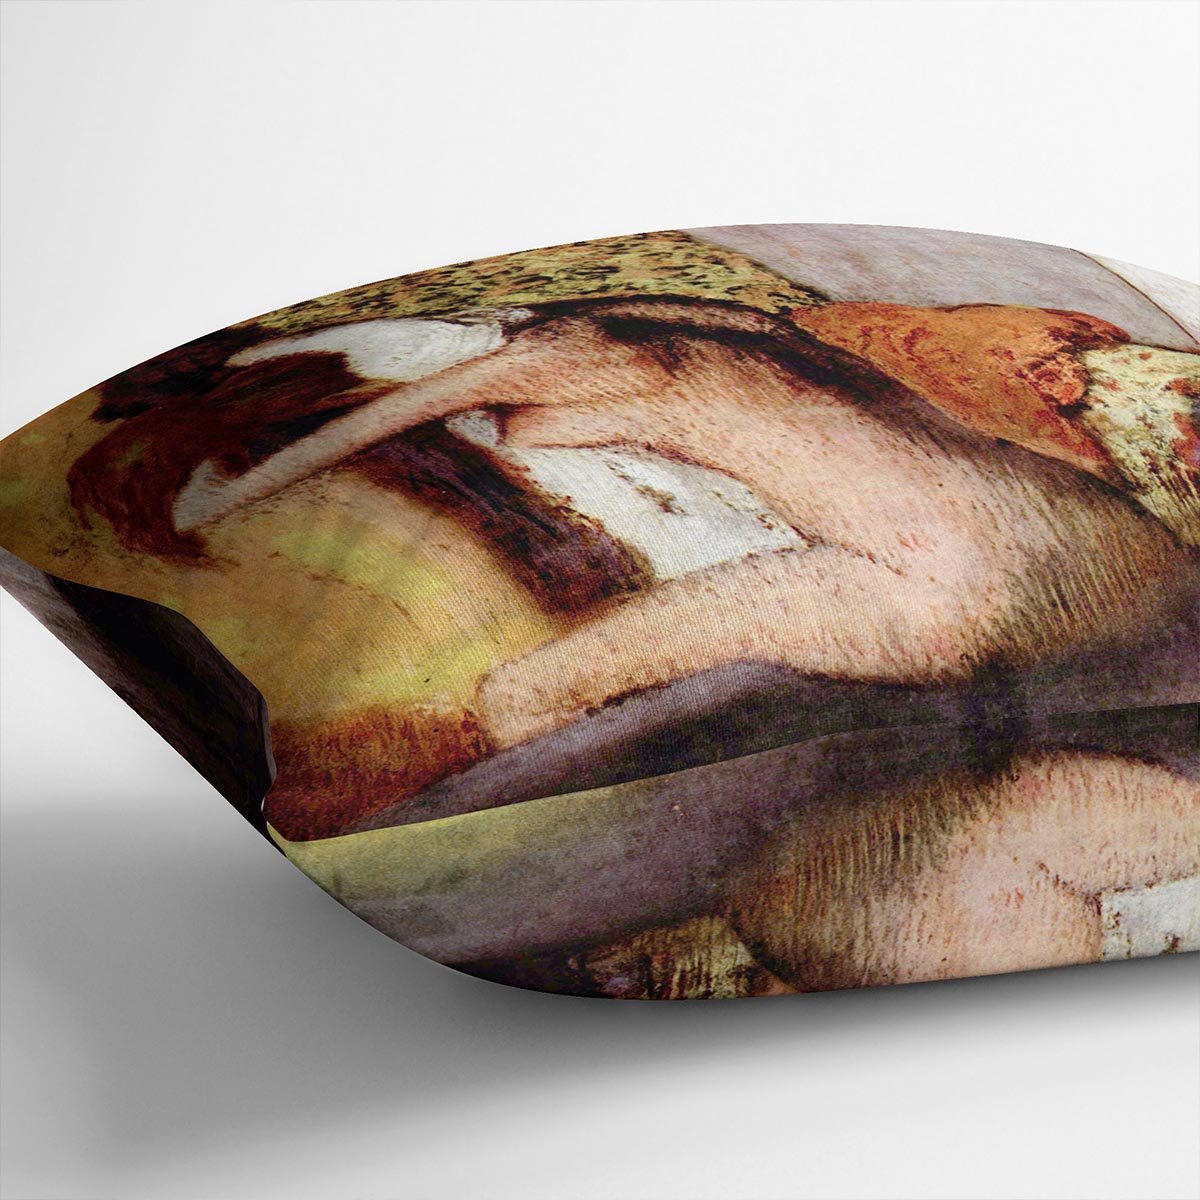 After bathing 2 by Degas Cushion